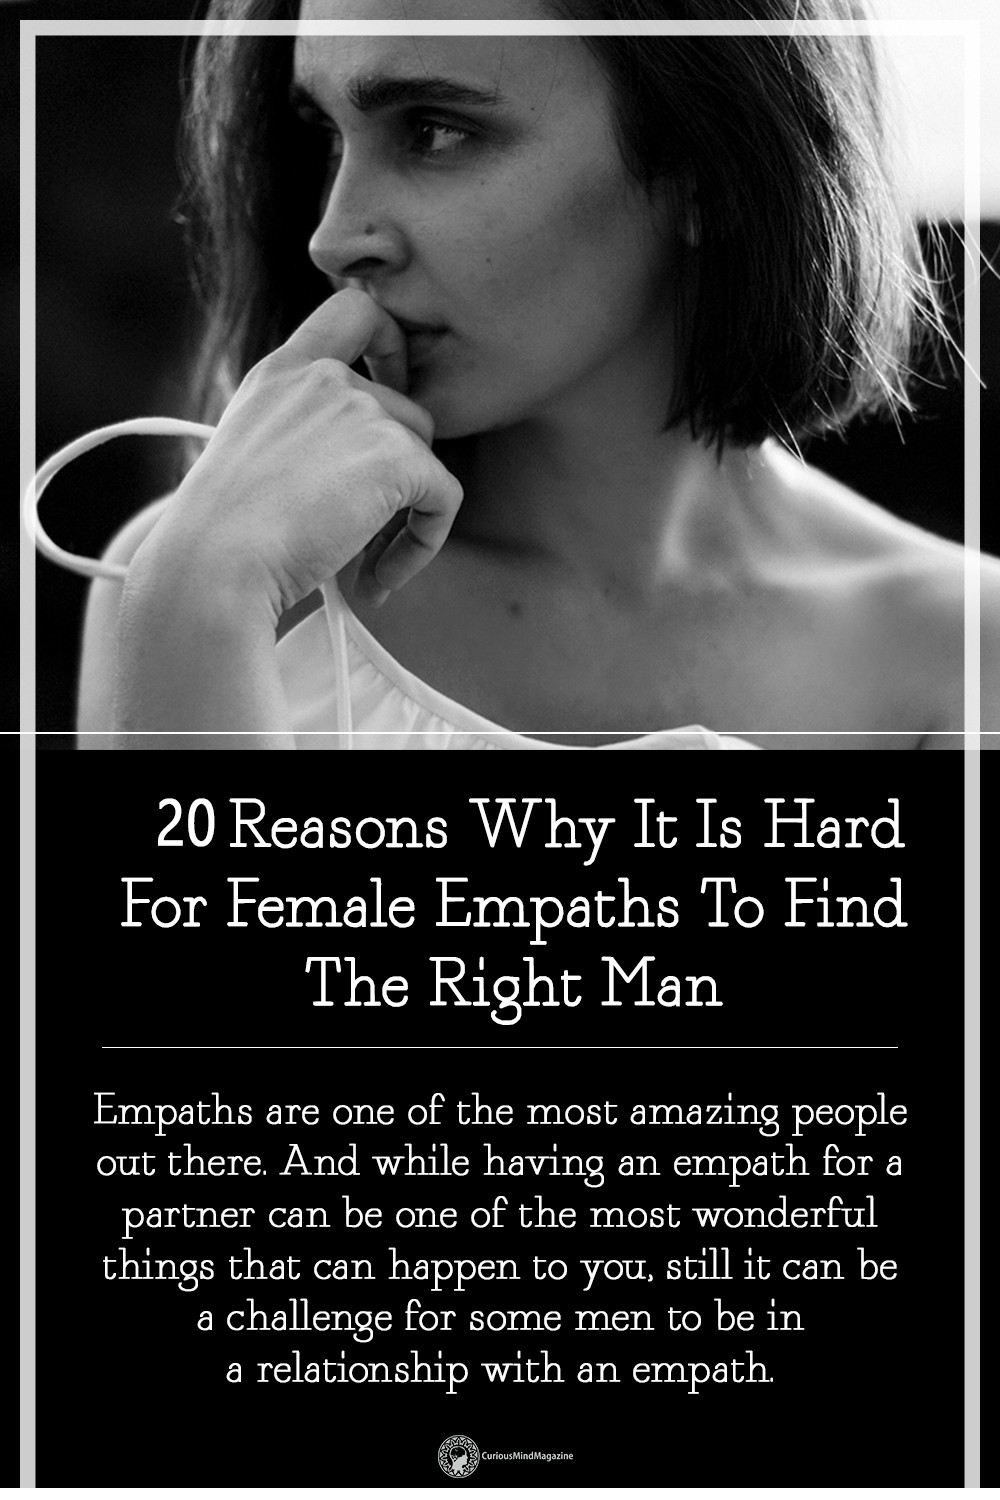 20 Reasons Why Female Empaths Have Trouble With Romantic Relationships